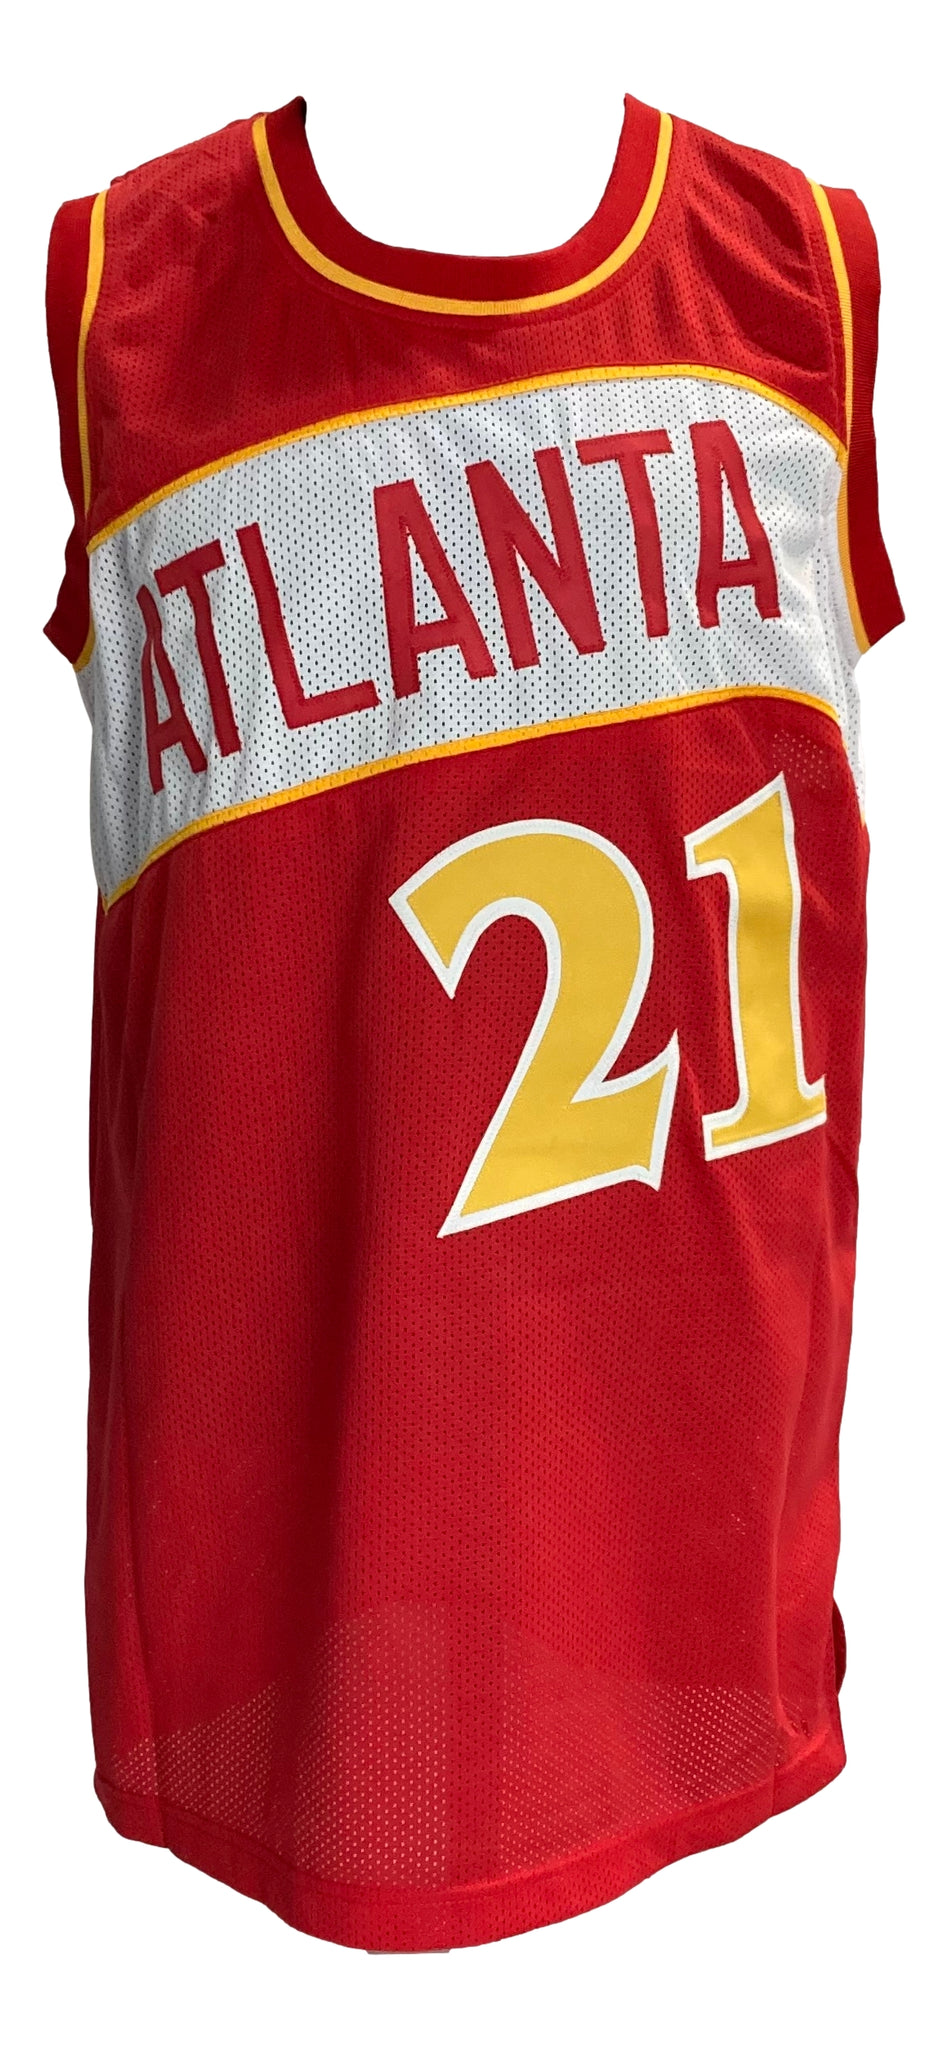 Dominique Wilkins Signed Red Custom Basketball Jersey